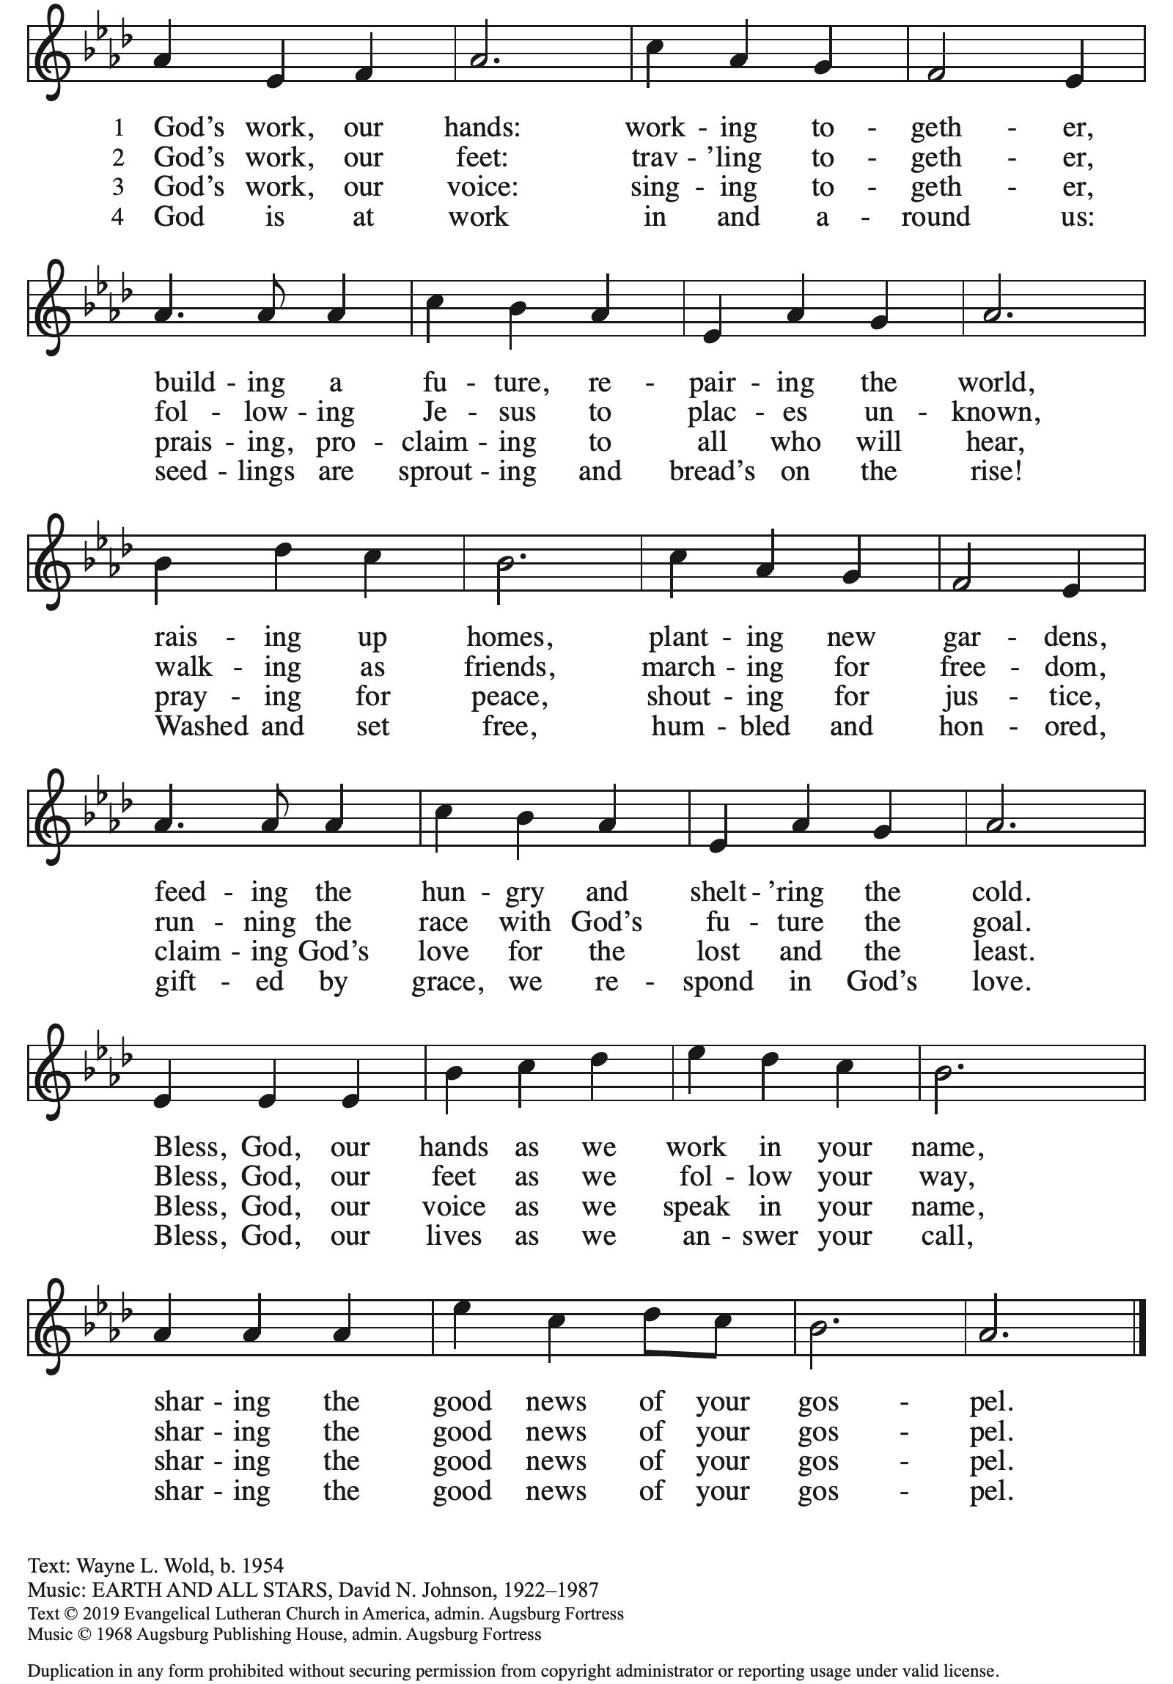 A sheet music with text and lines

Description automatically generated